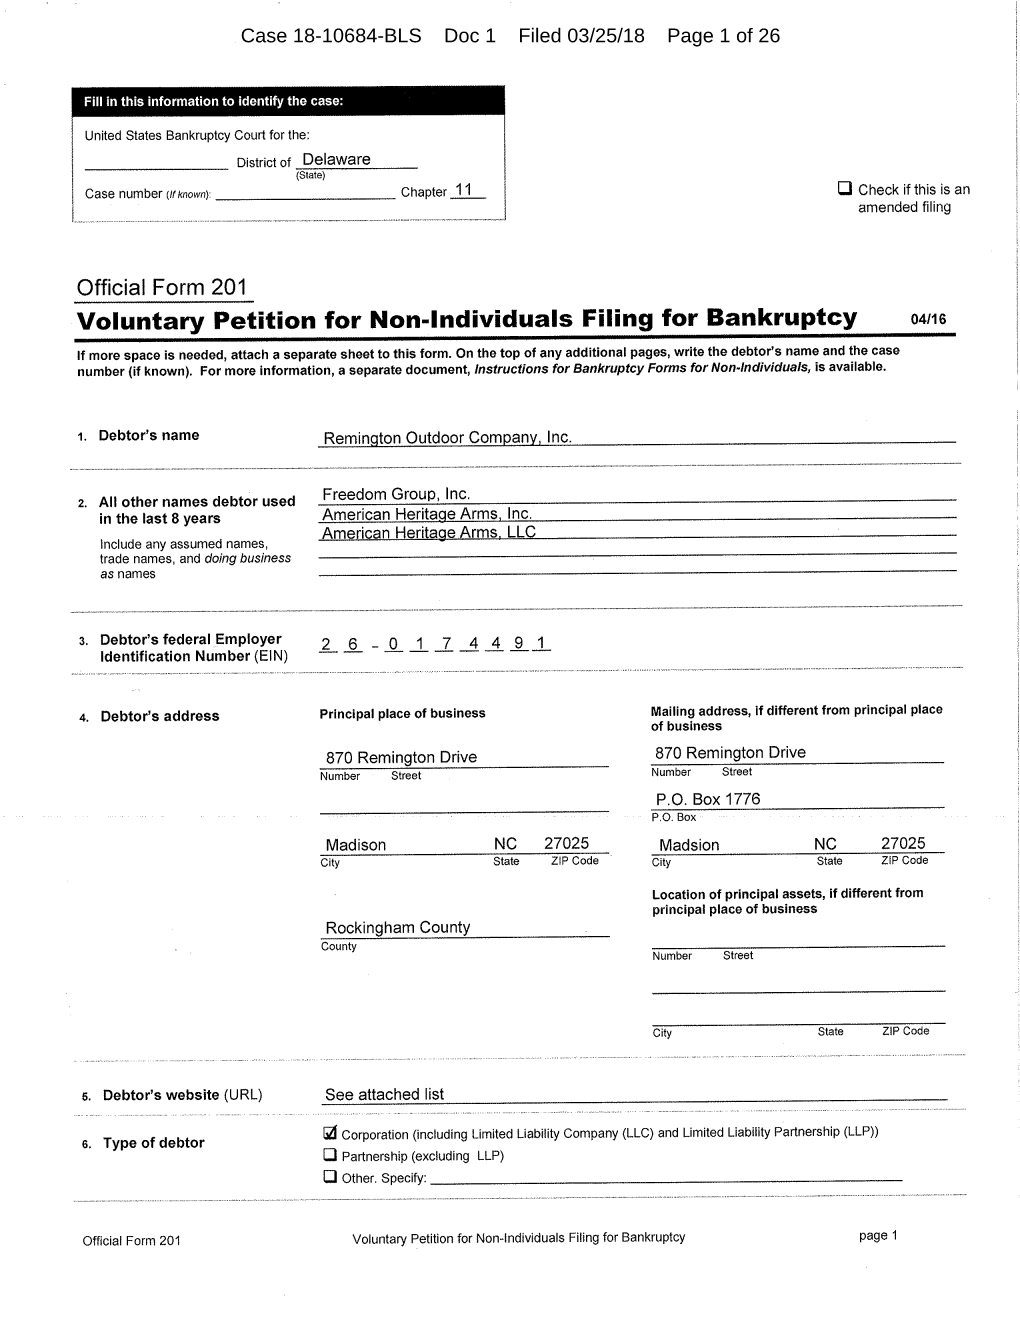 Official Form 201 Voluntary Petition for Non-Individuals Filing for Bankruptcy 04/16